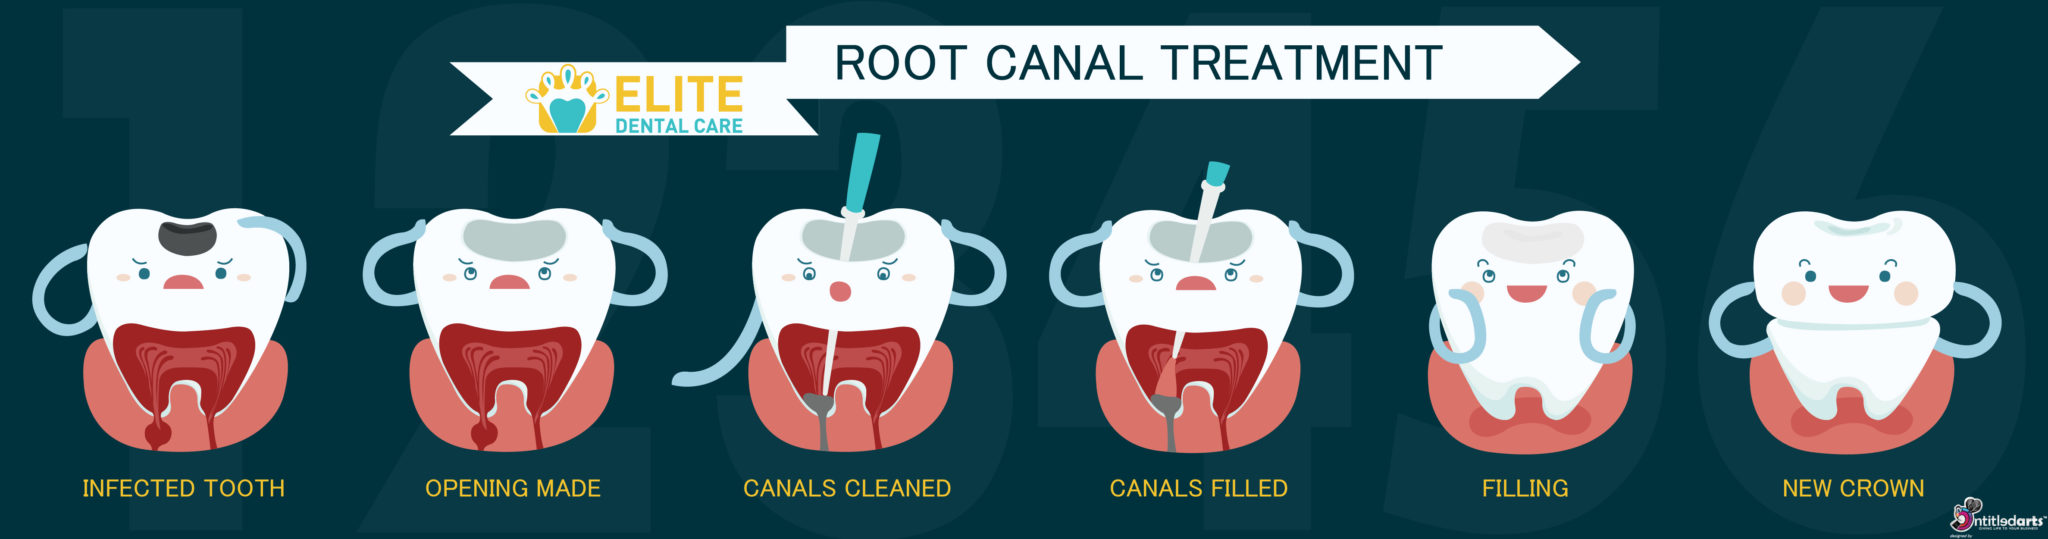 Root Canal Treatment (Endodontic Therapy)